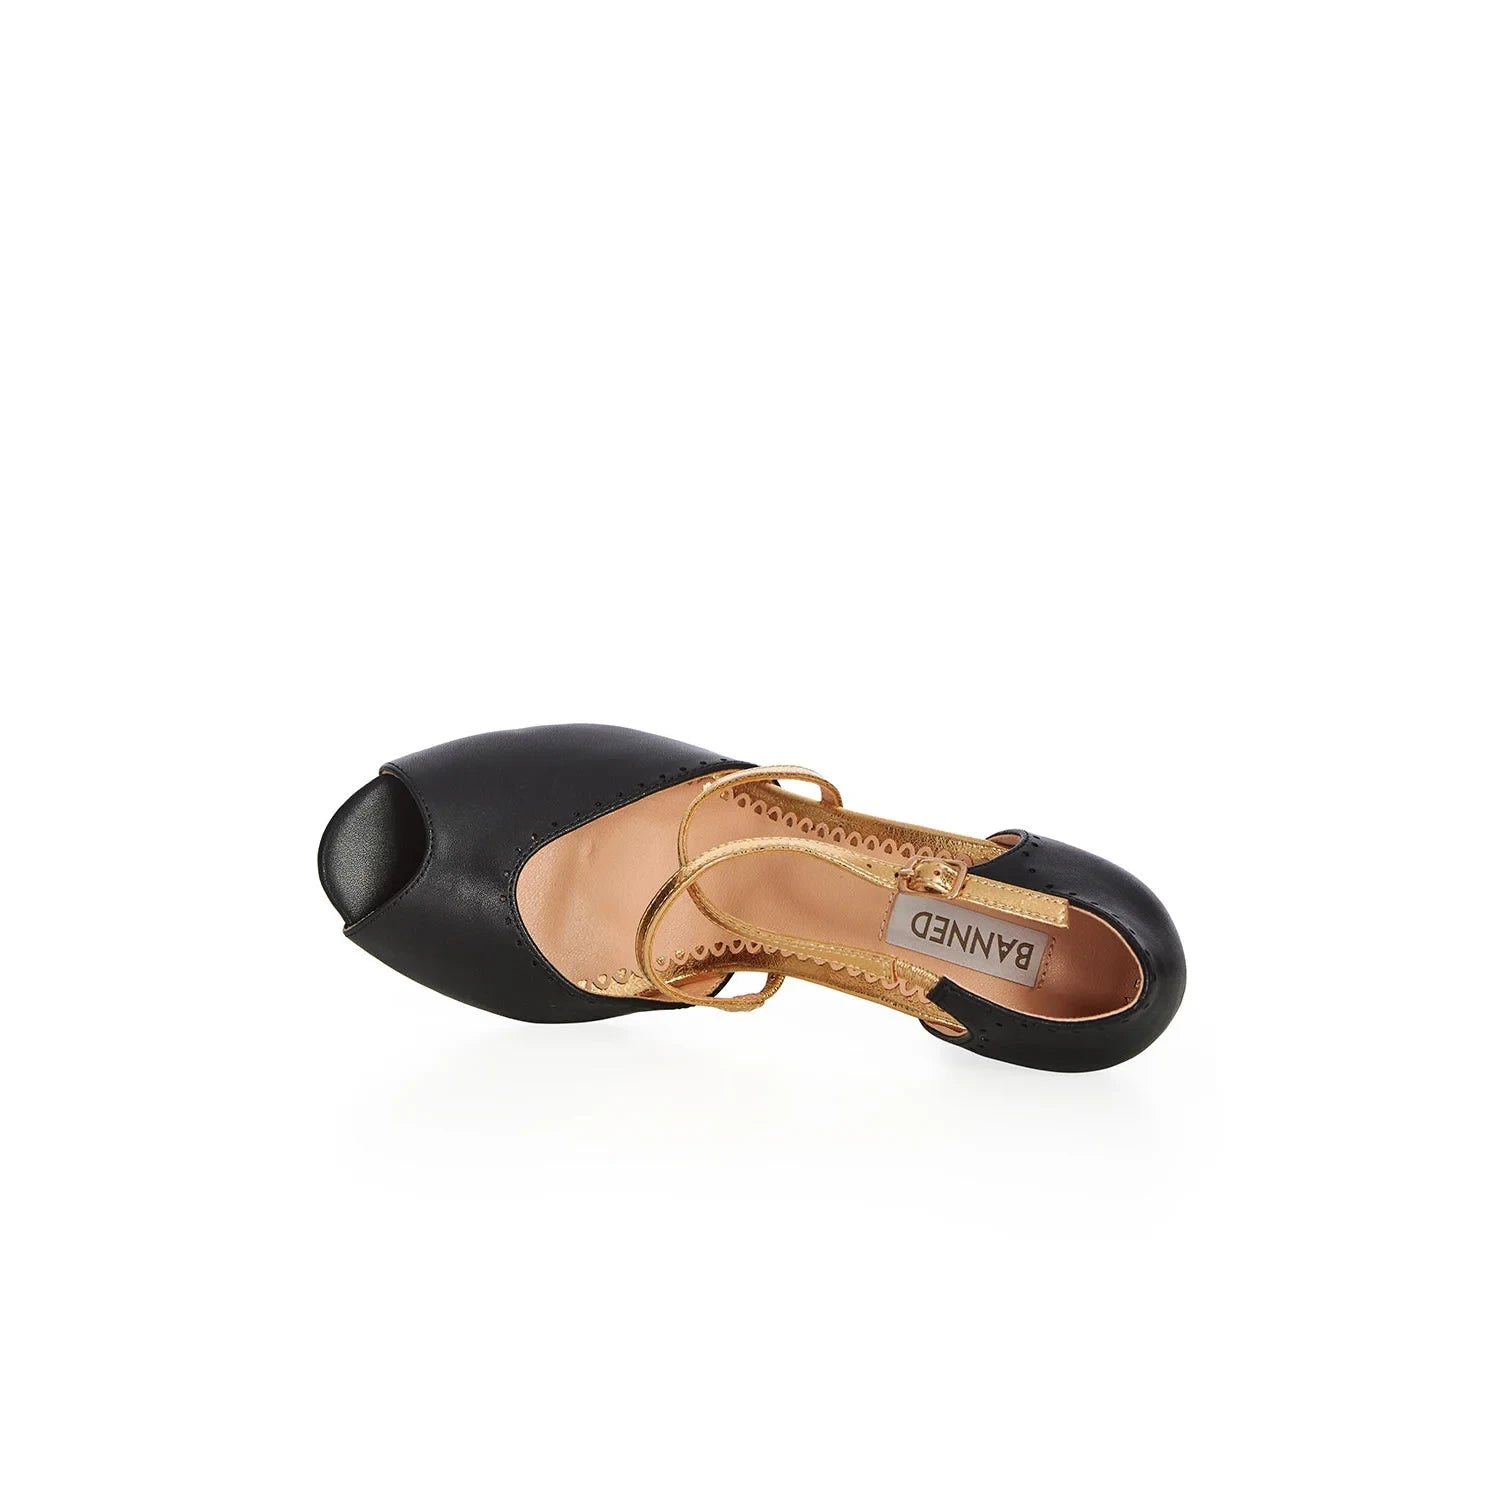 Black Peep Toe dance shoes with Gold crossover strap detail